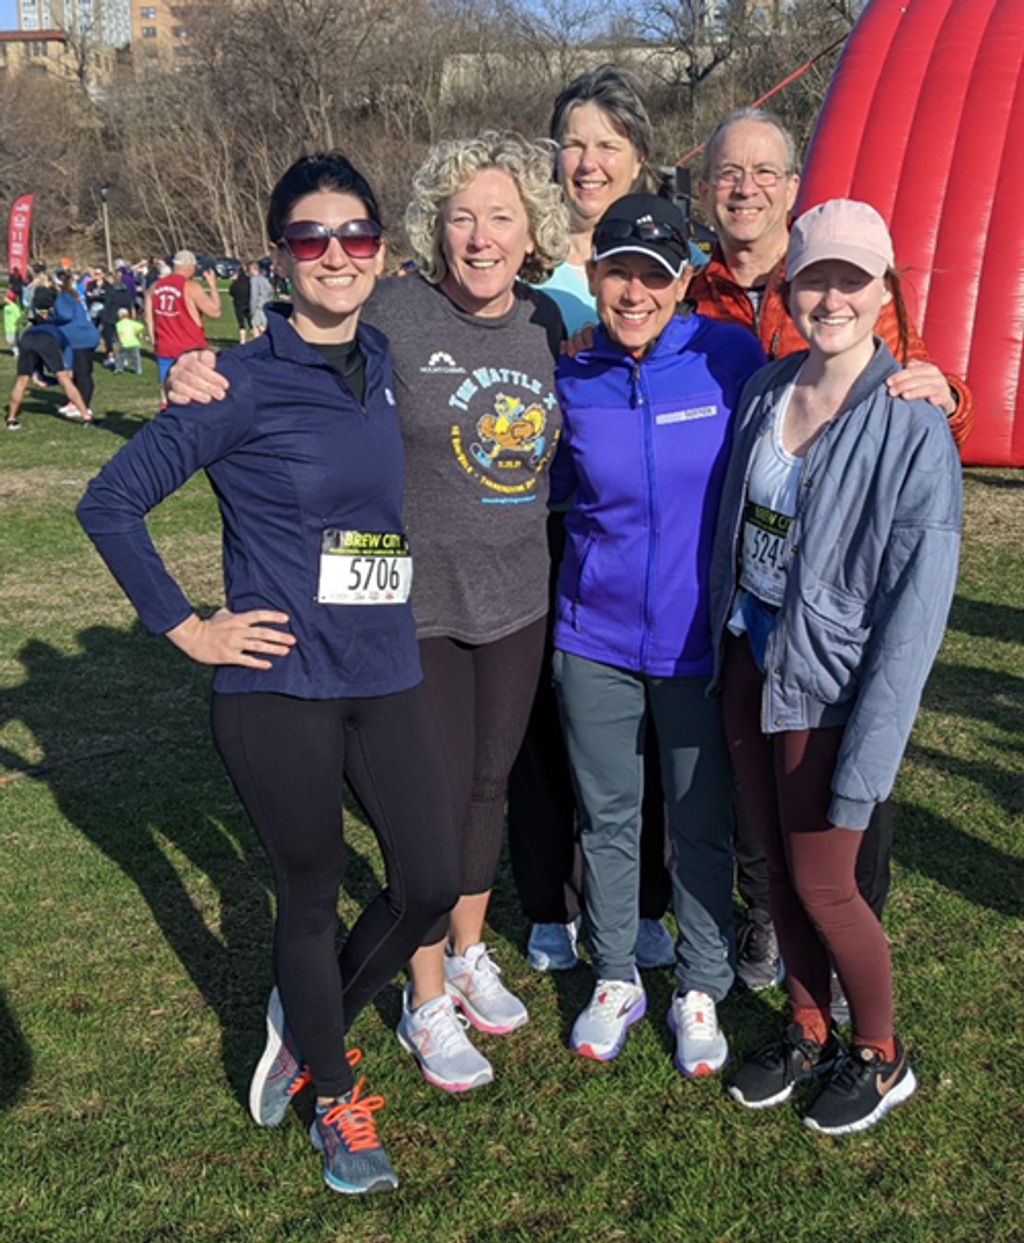 Six MoreSteam team members after the Brew City race